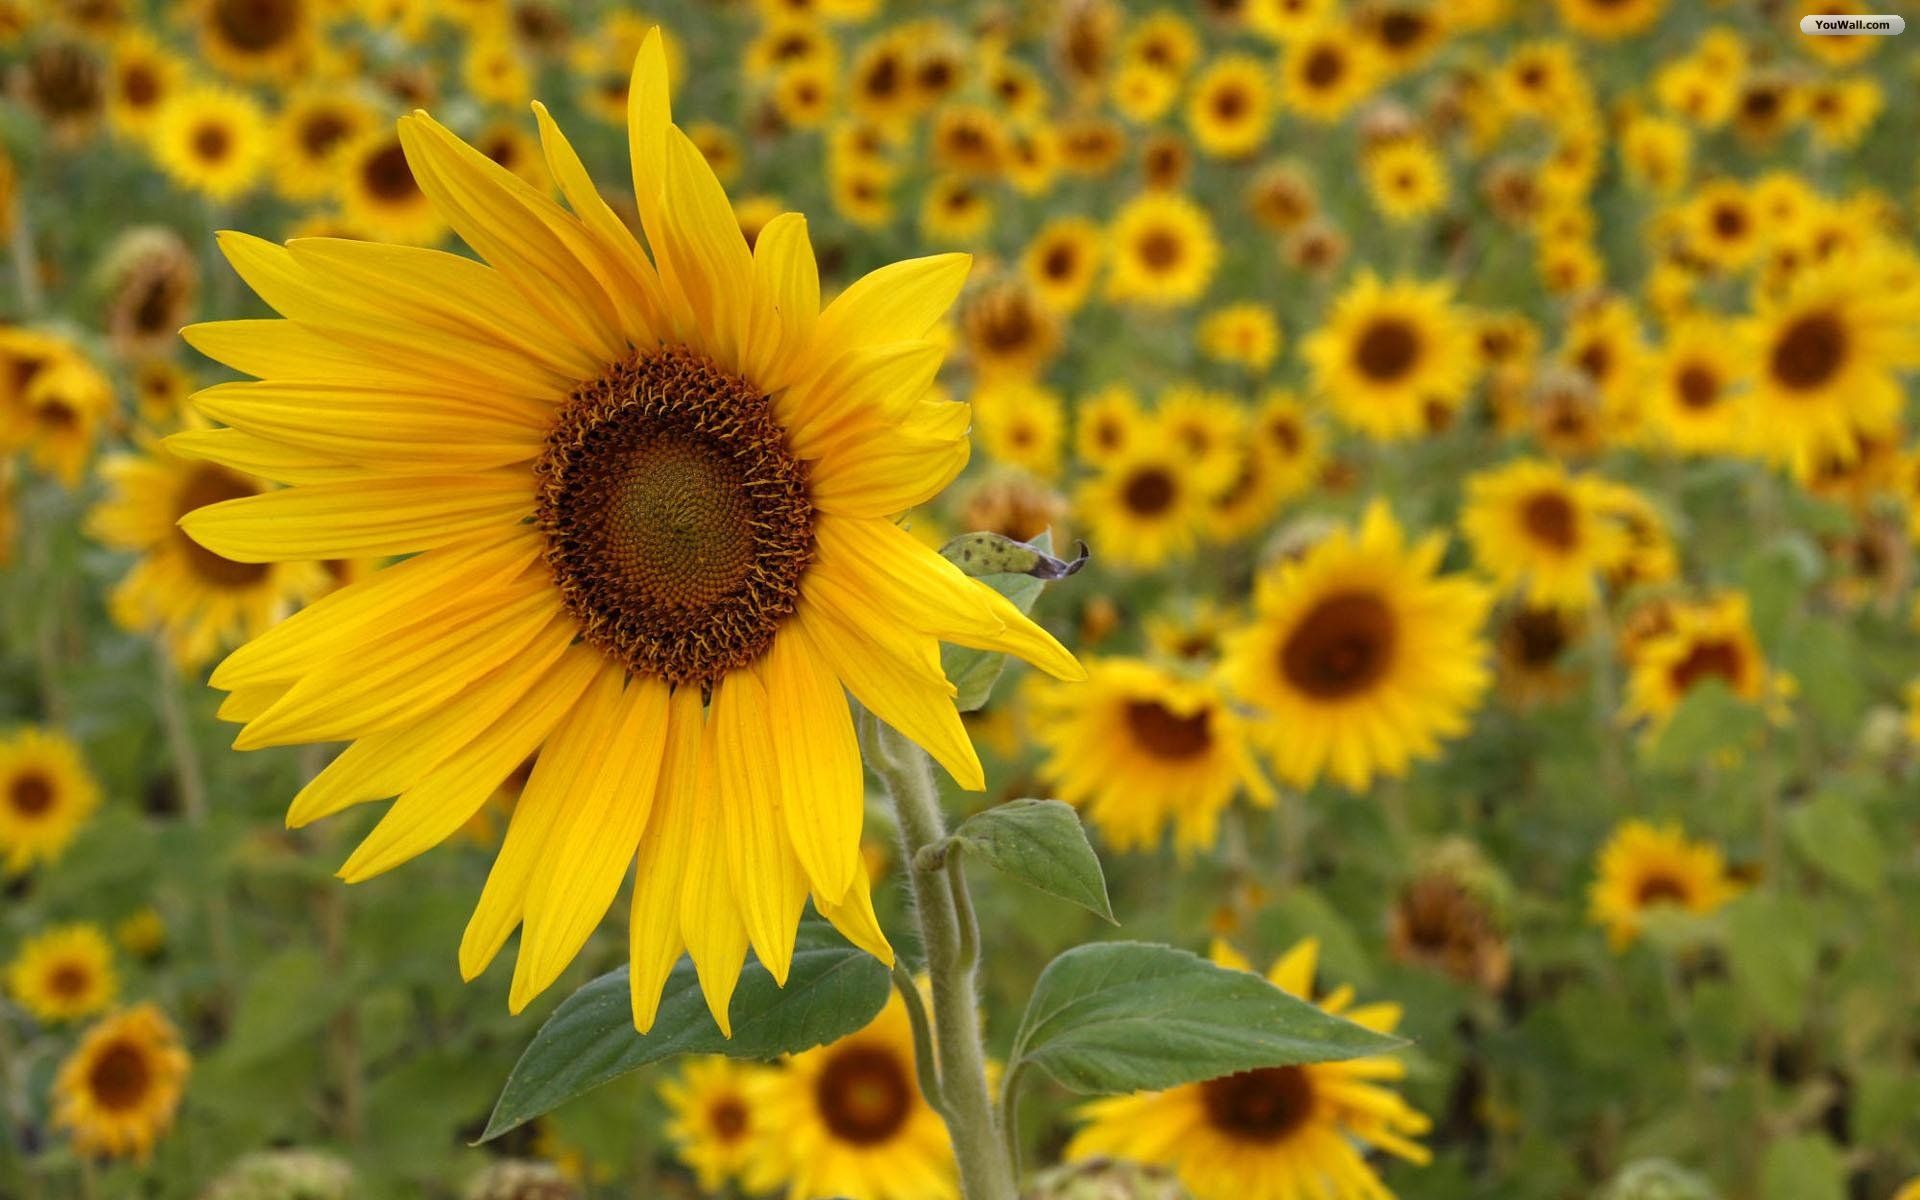 Sunflowers Summer Windows 7 and 8 Theme | All for Windows 10 Free